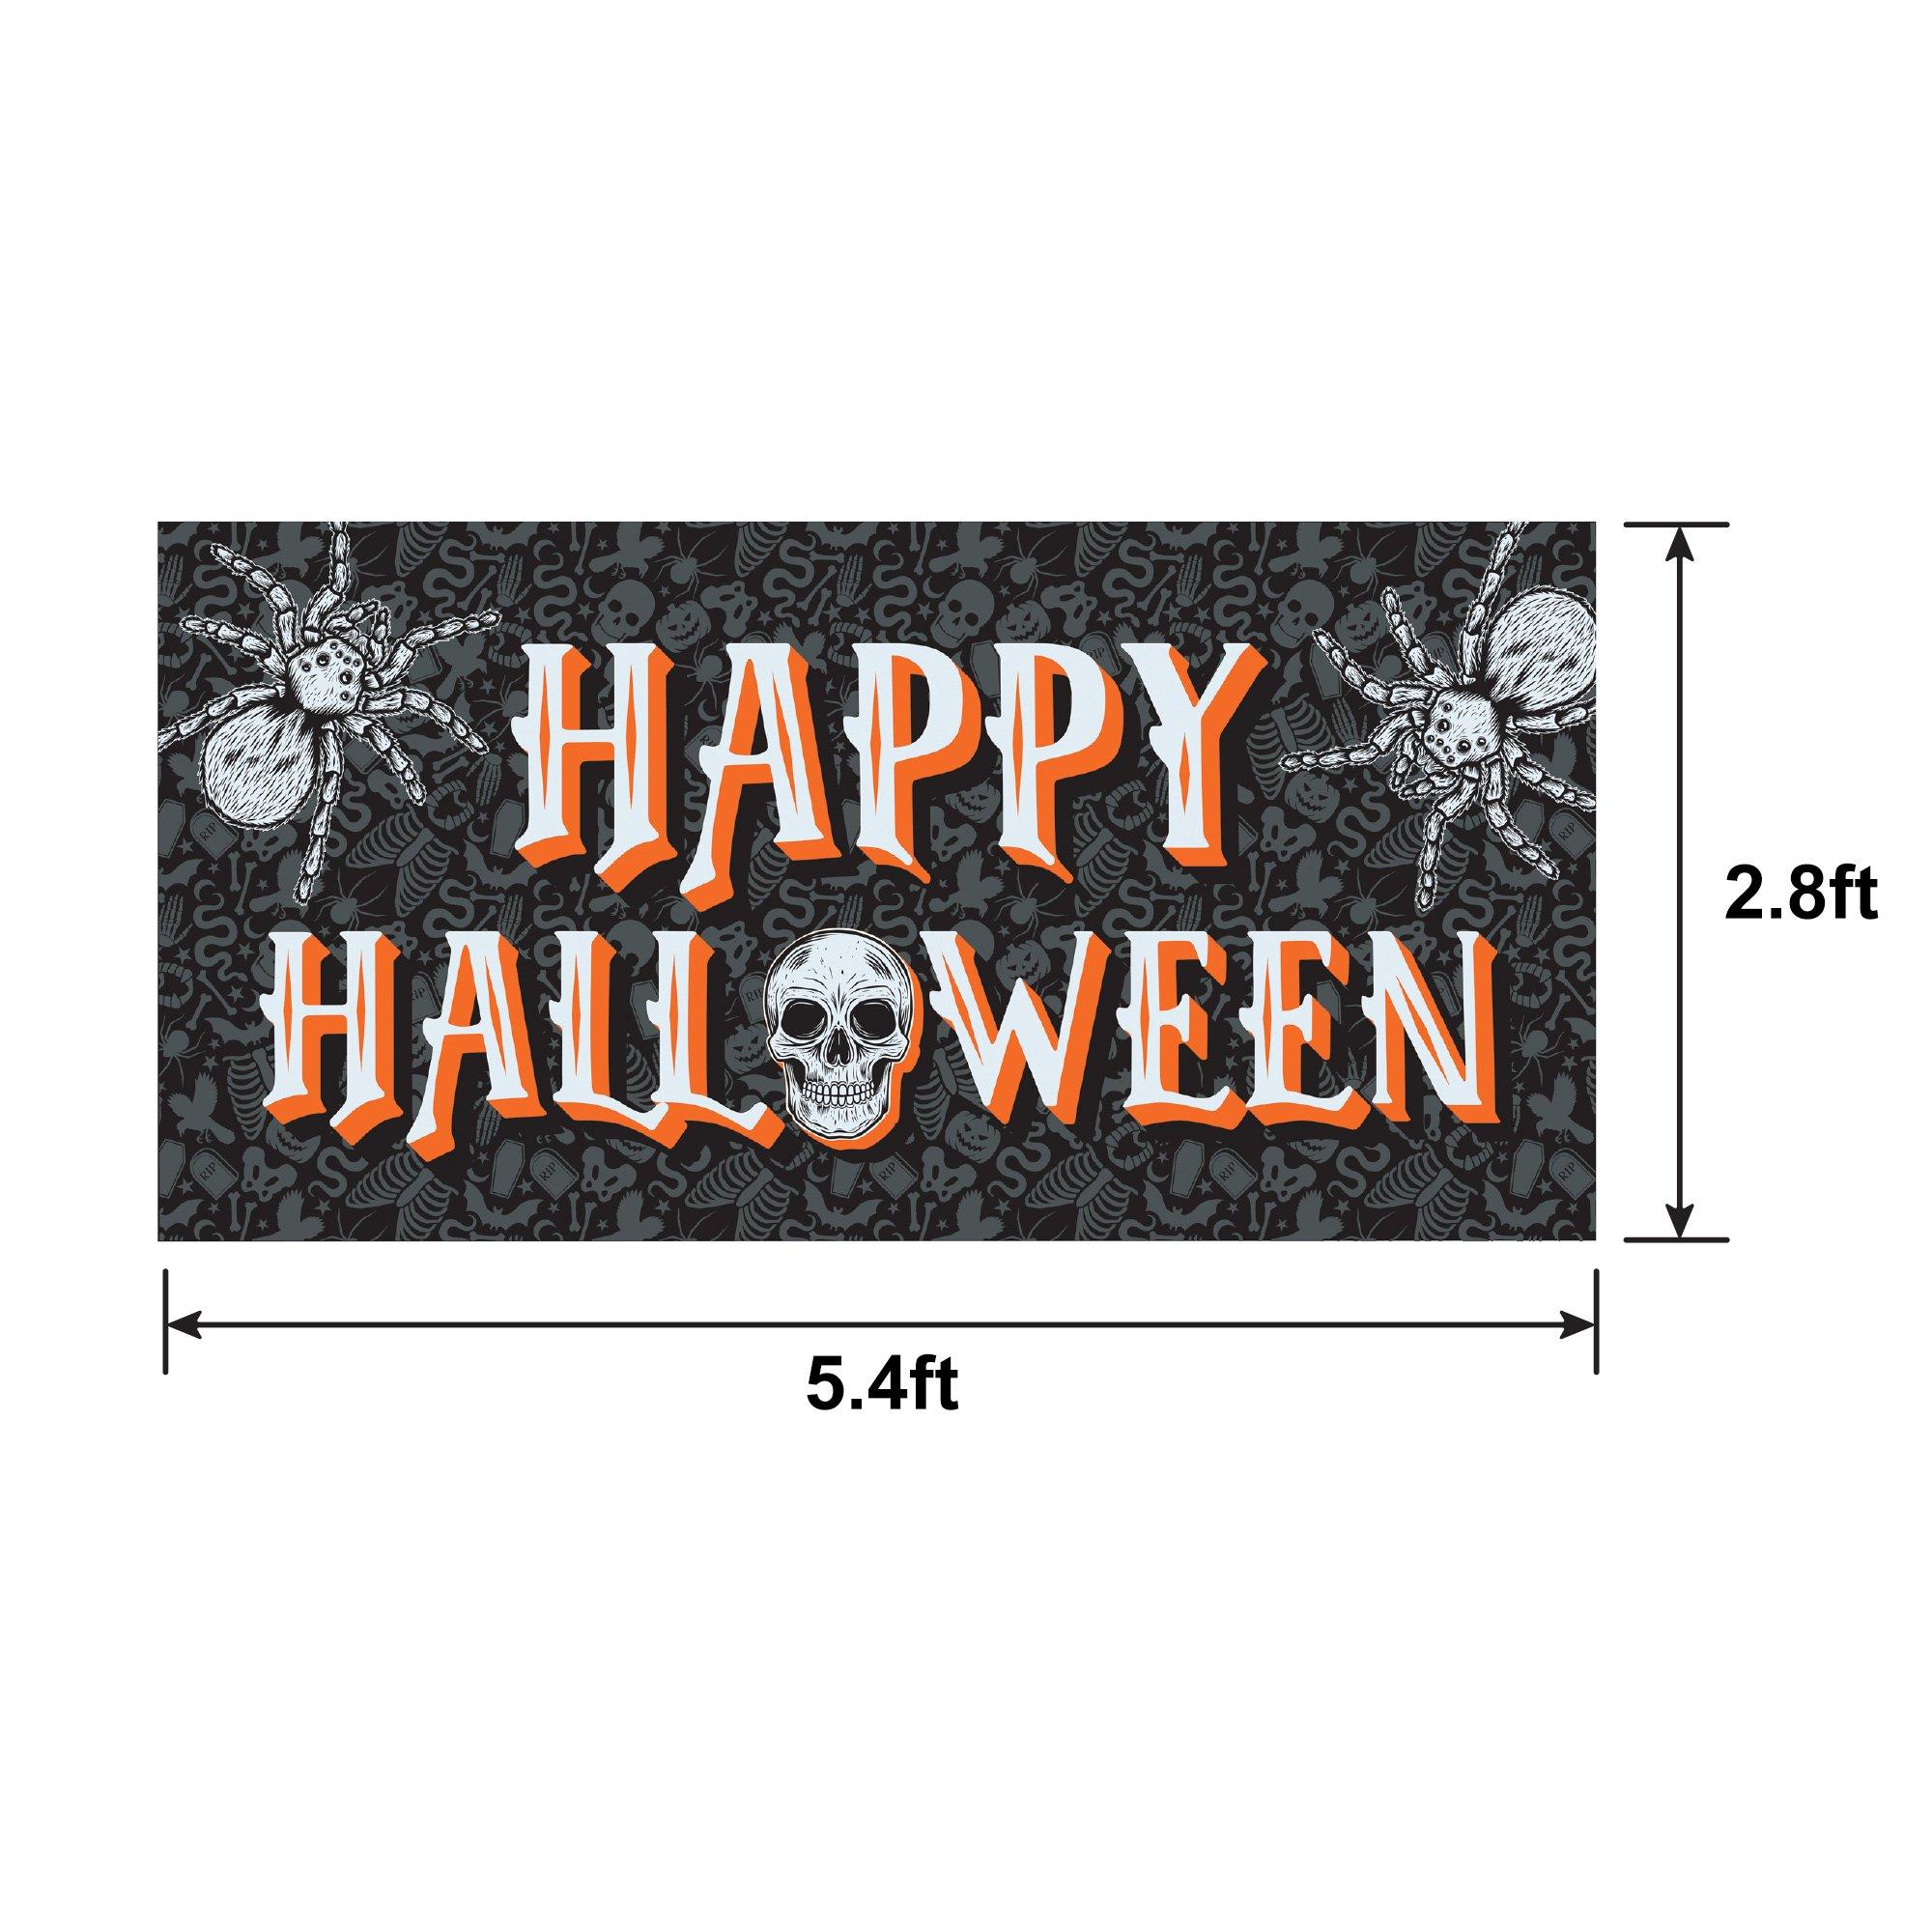 Wicked Hauntings Plastic Horizontal Banner, 5.4ft x 2.8ft